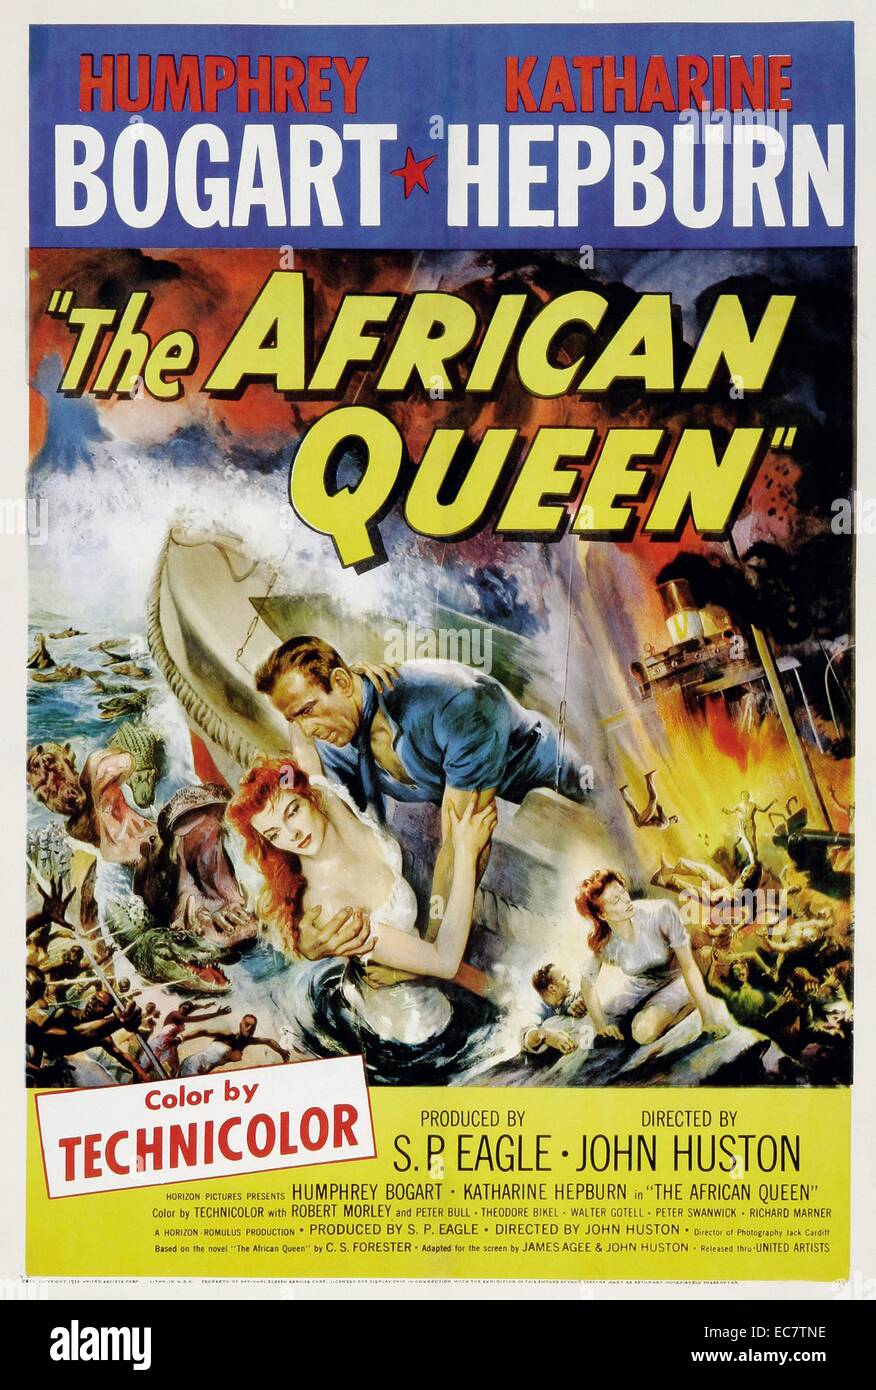 The African Queen is a 1951 adventure film adapted from the 1935